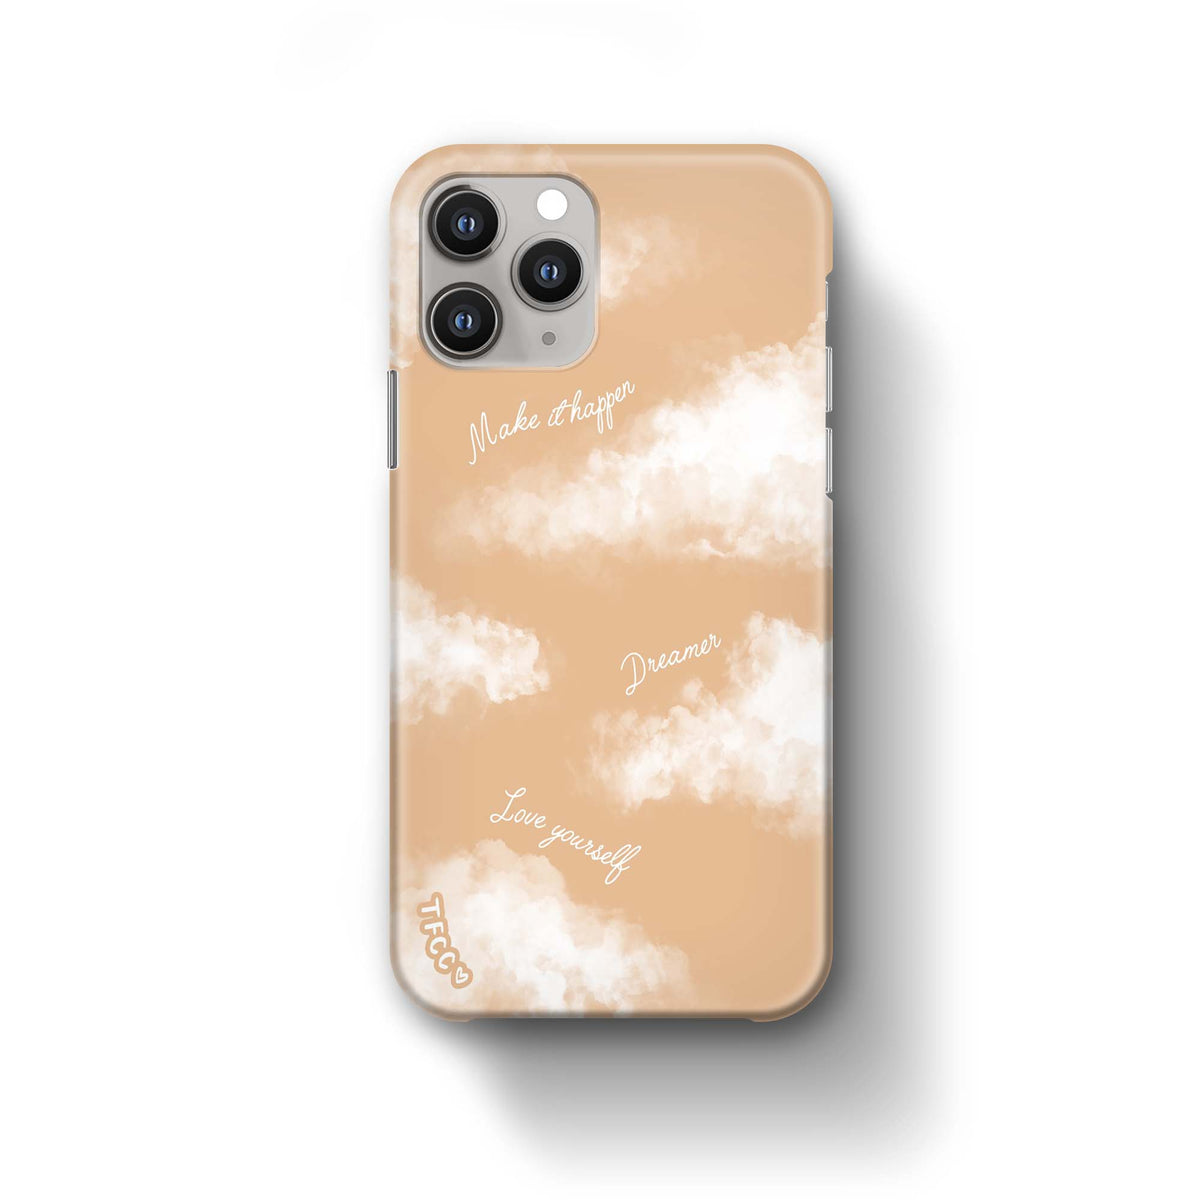 HEAD IN THE CLOUDS CASE - thefonecasecompany